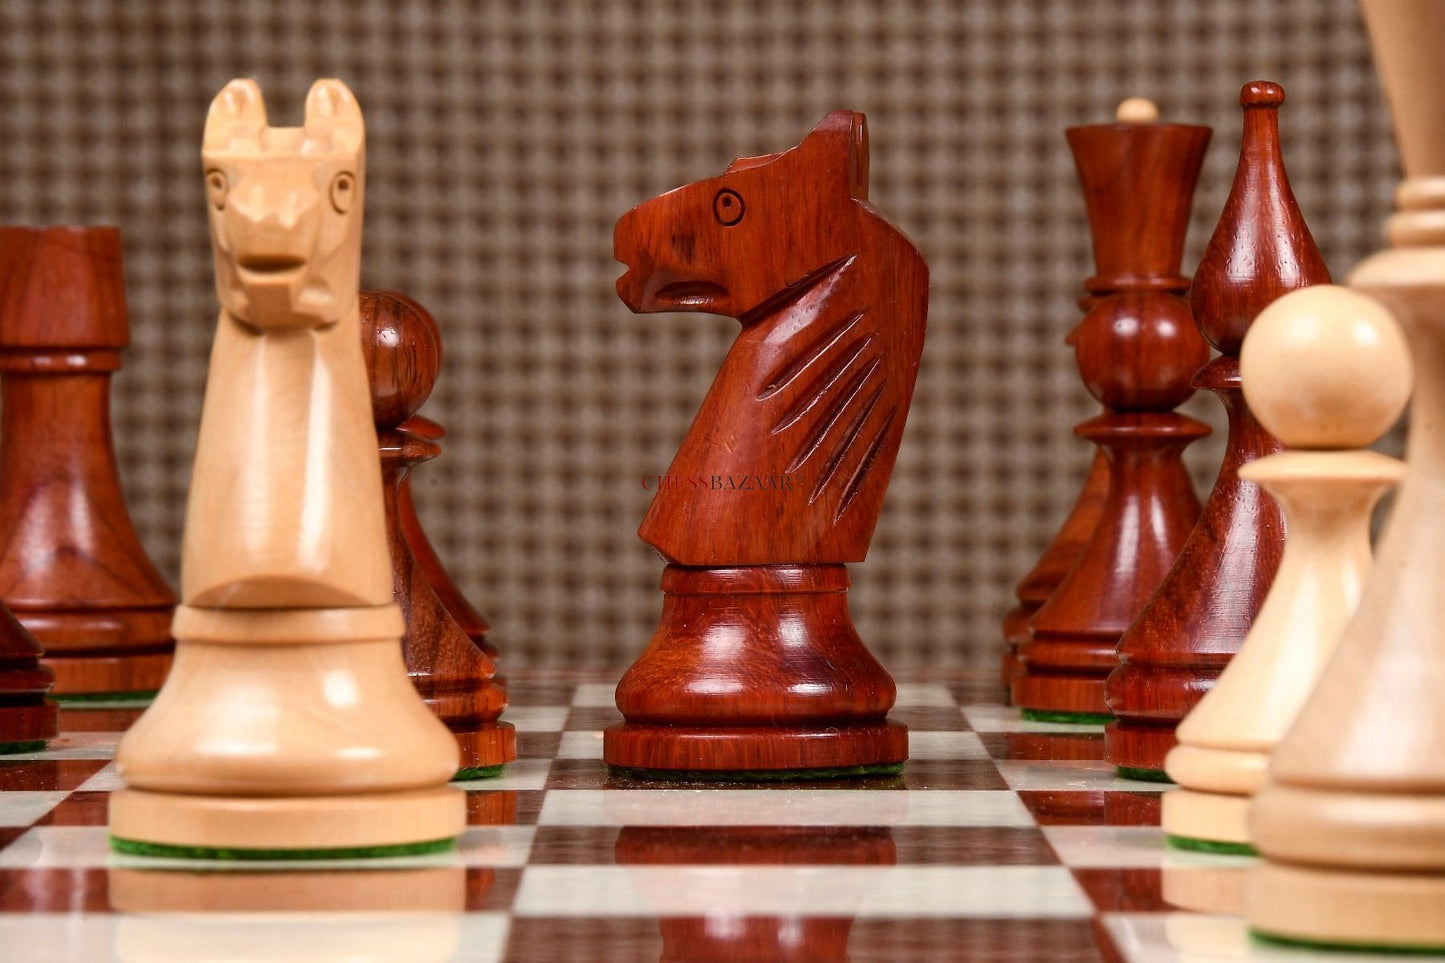 Reproduced 1961 Soviet Championship Baku Chess Pieces in Bud Rosewood & Boxwood - 4” King